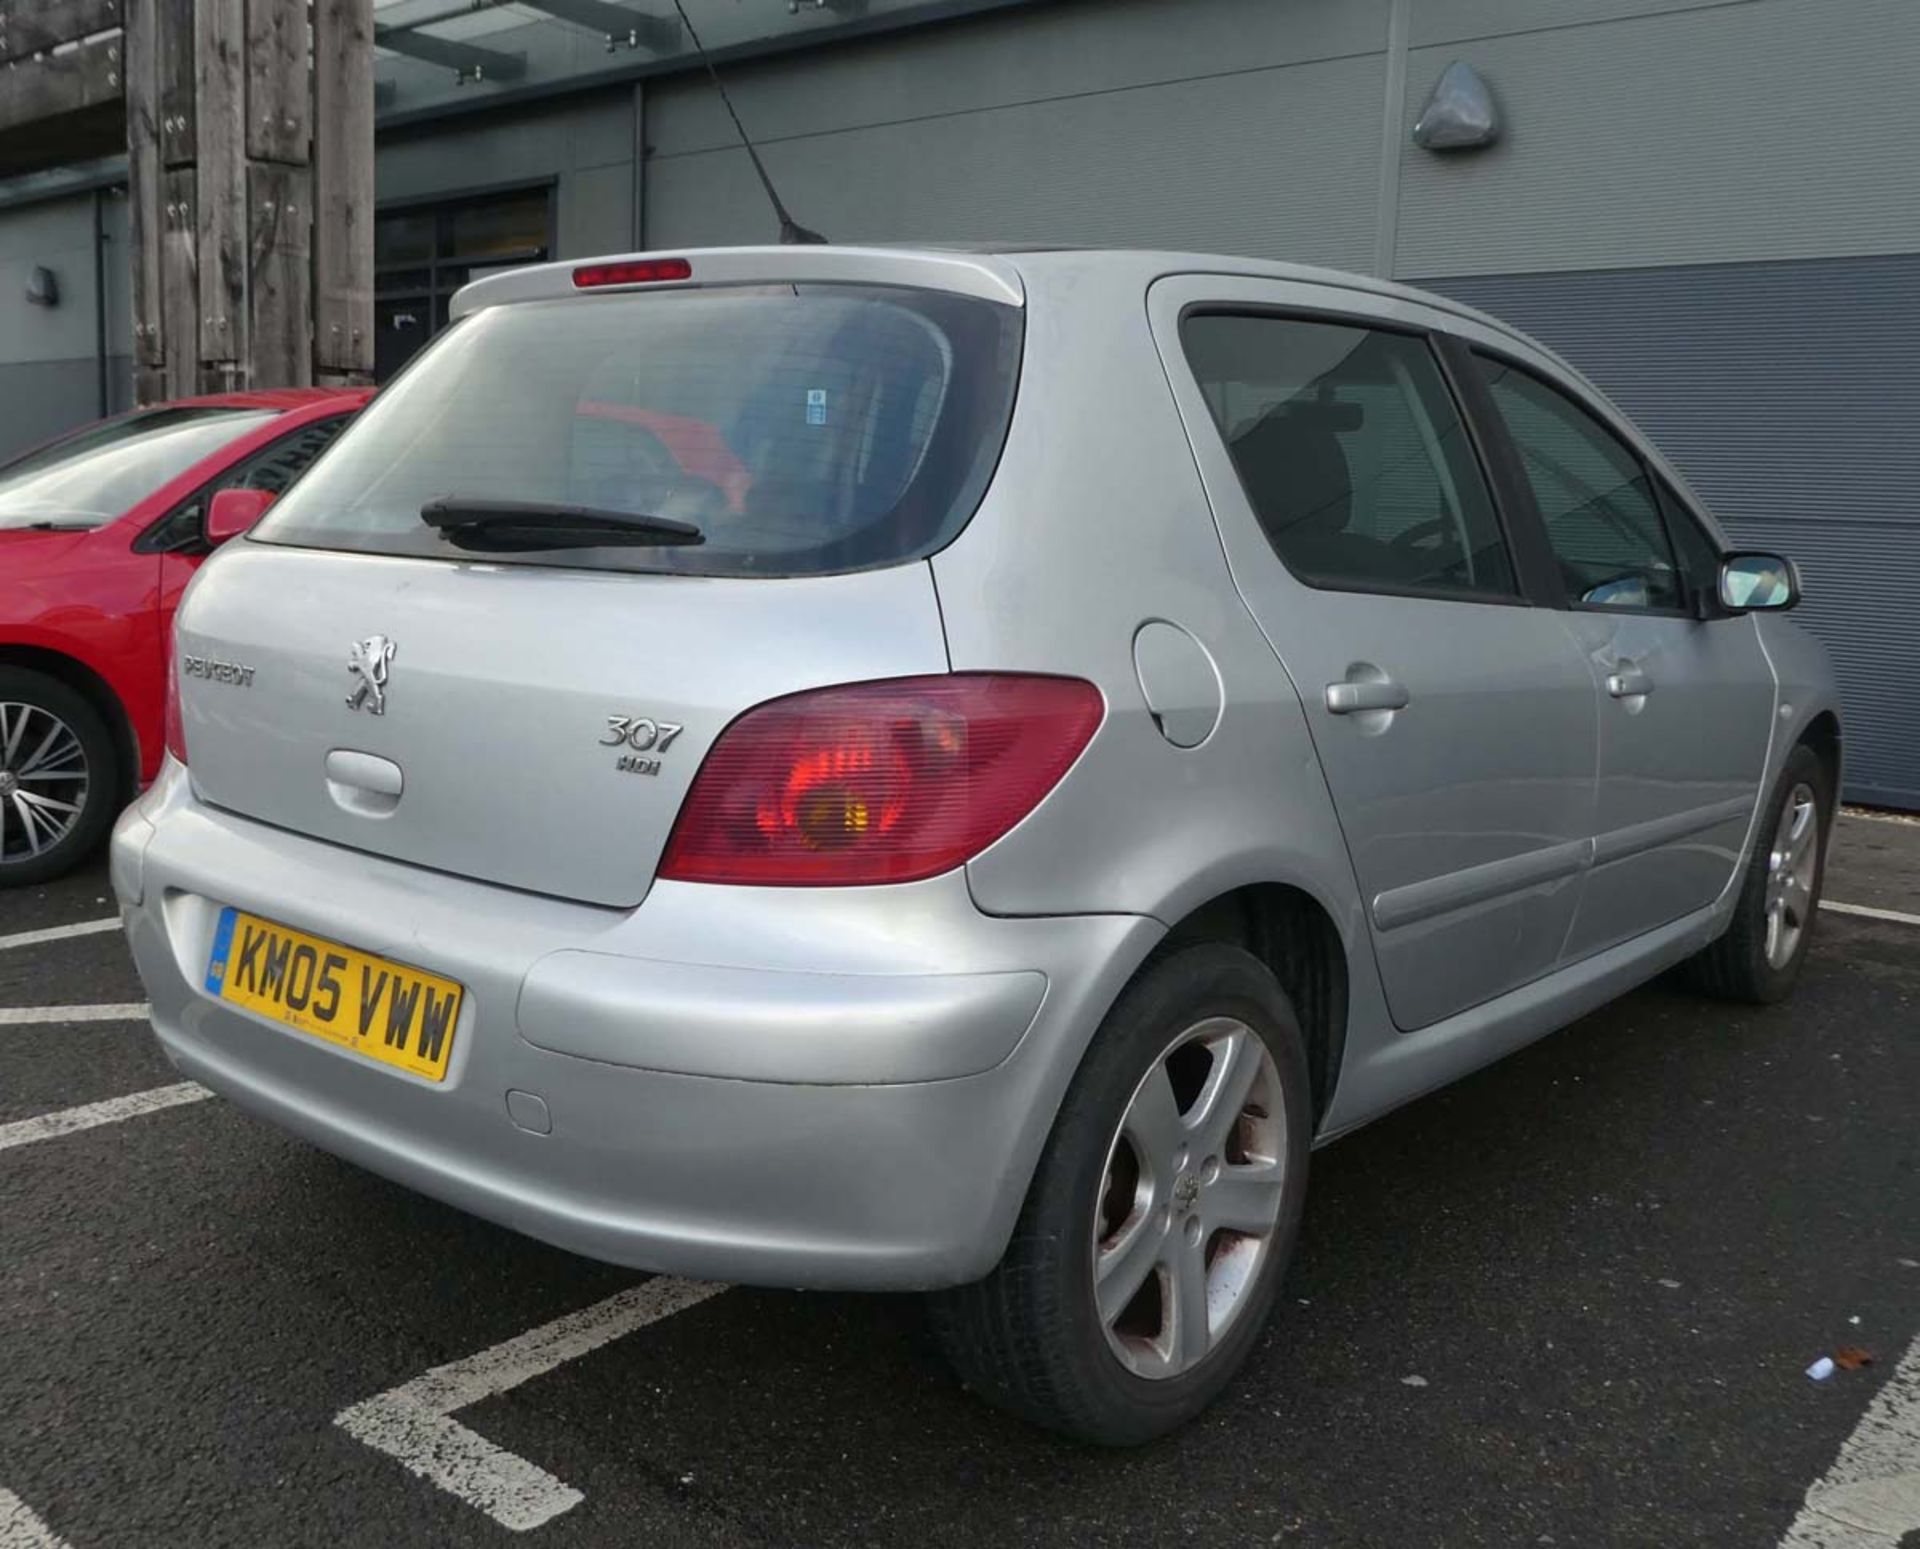 KM05 VWW (2005) Peugeot 307 in silver, 1560cc, diesel, 4 former keepers, 1 key, first registered - Image 3 of 10